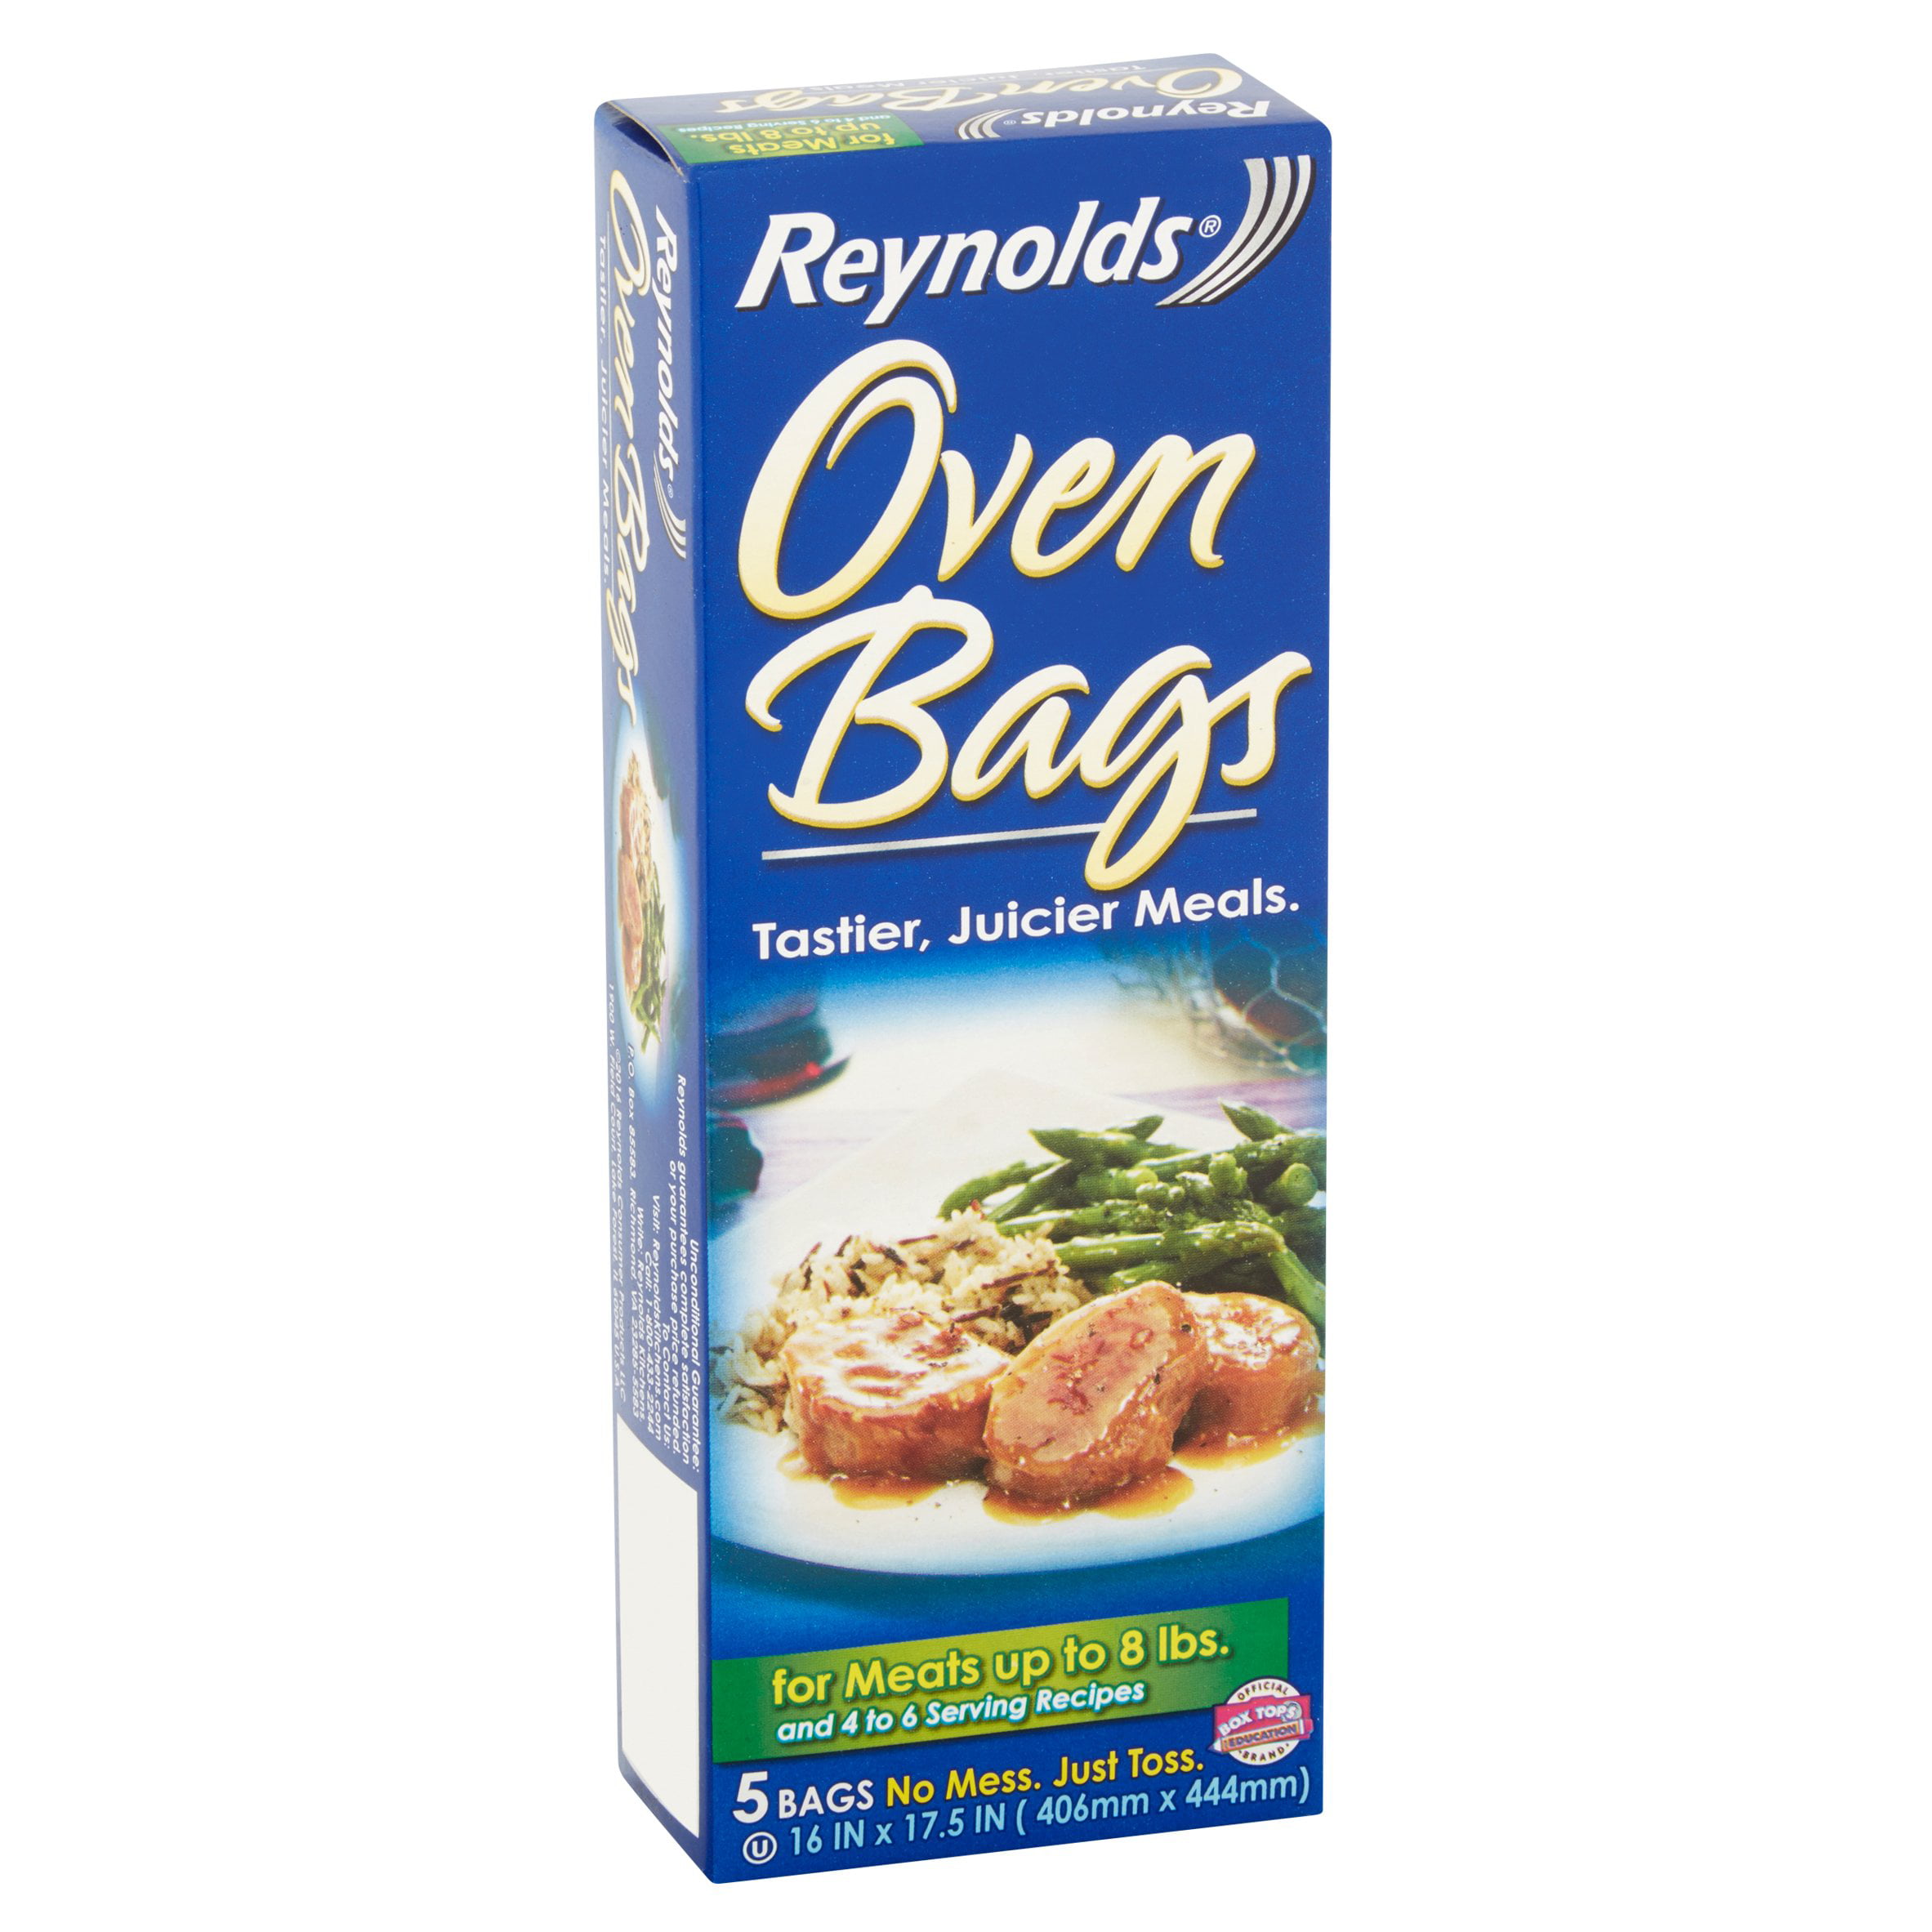 Reynolds Kitchens Oven Bags, Large, 6 Count 